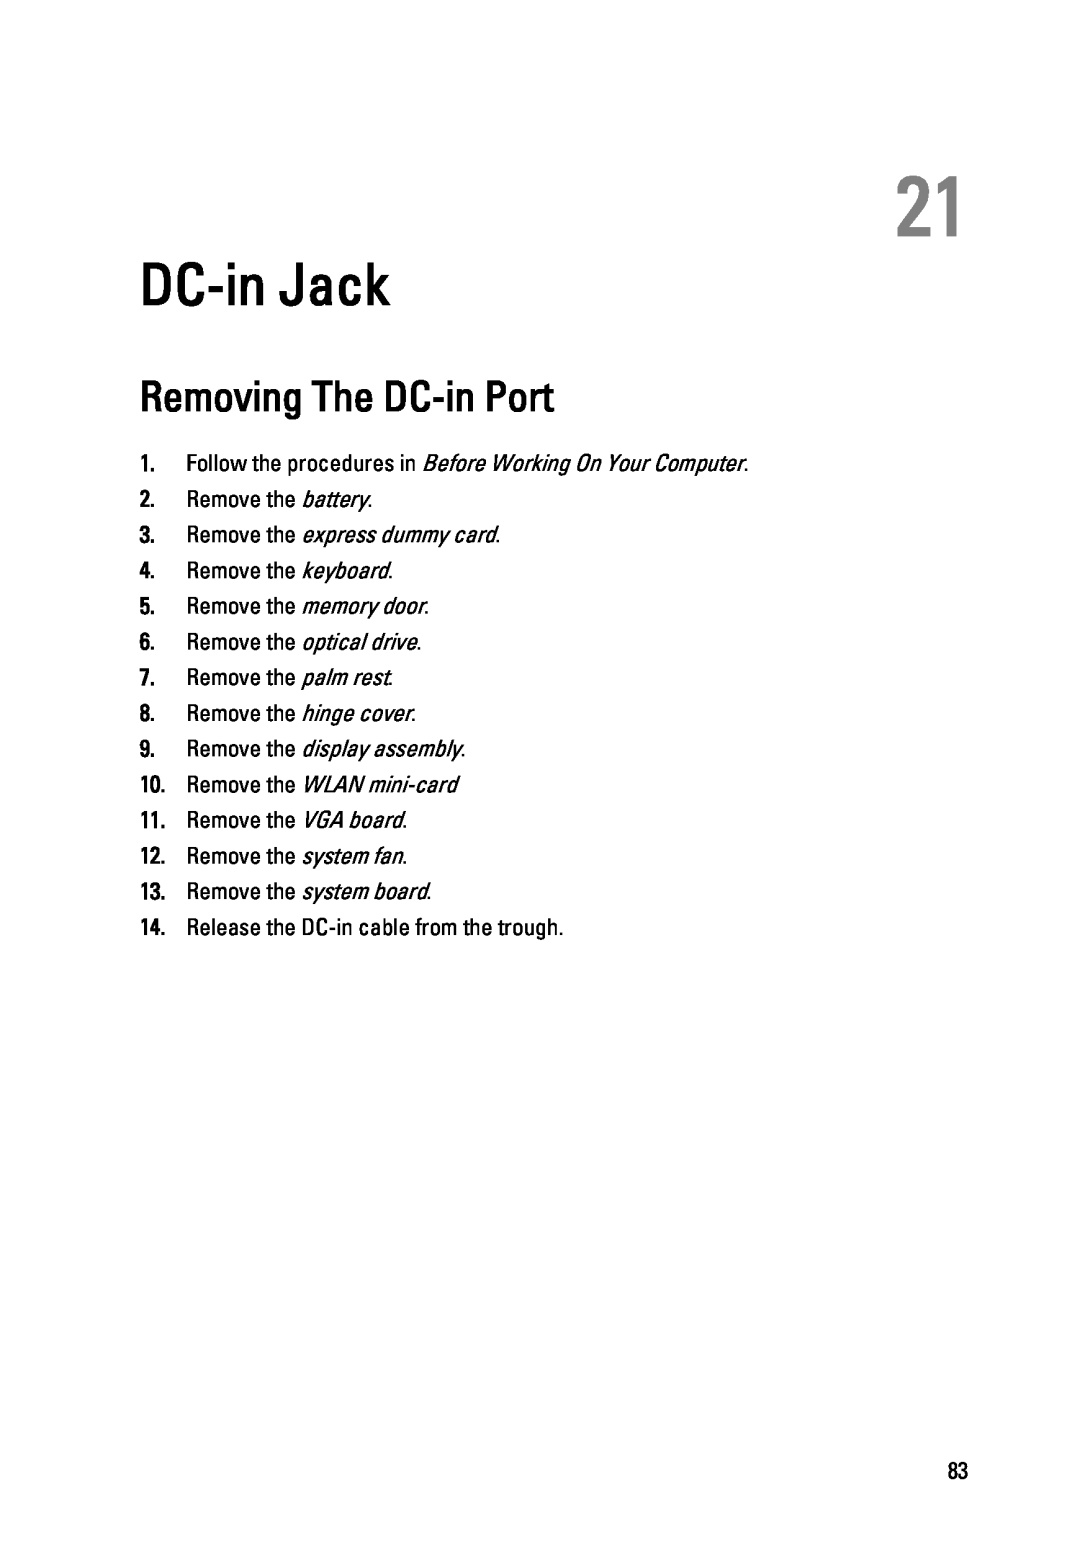 Dell 3450 owner manual DC-in Jack, Removing The DC-in Port, Remove the express dummy card, Remove the optical drive 